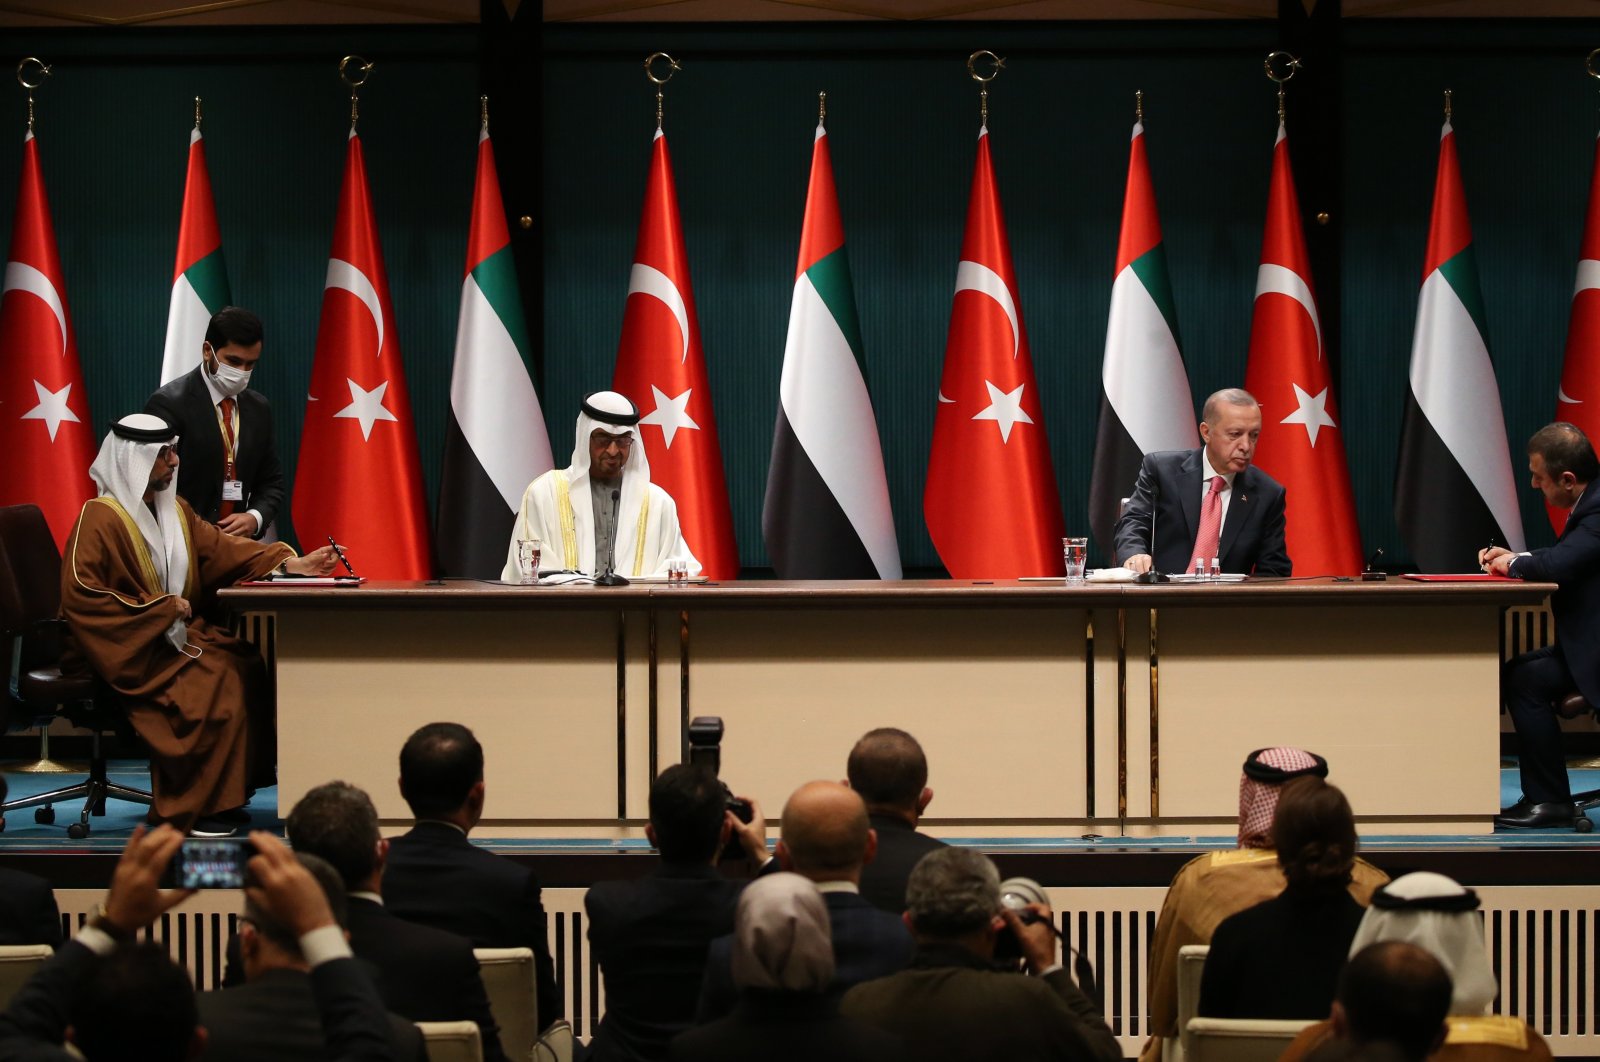 Crown Prince of the Emirate of Abu Dhabi Mohammed bin Zayed (2nd L), UAE Minister of Energy and Industry Suhail Al Mazroui (L), Turkish President Recep Tayyip Erdoğan (2nd R) and Turkish Central Bank Governor Şahap Kavcıoğlu (R) during an agreement ceremony after their meeting at the Presidential Palace in Ankara, Turkey, Nov. 24, 2021. (EPA Photo)